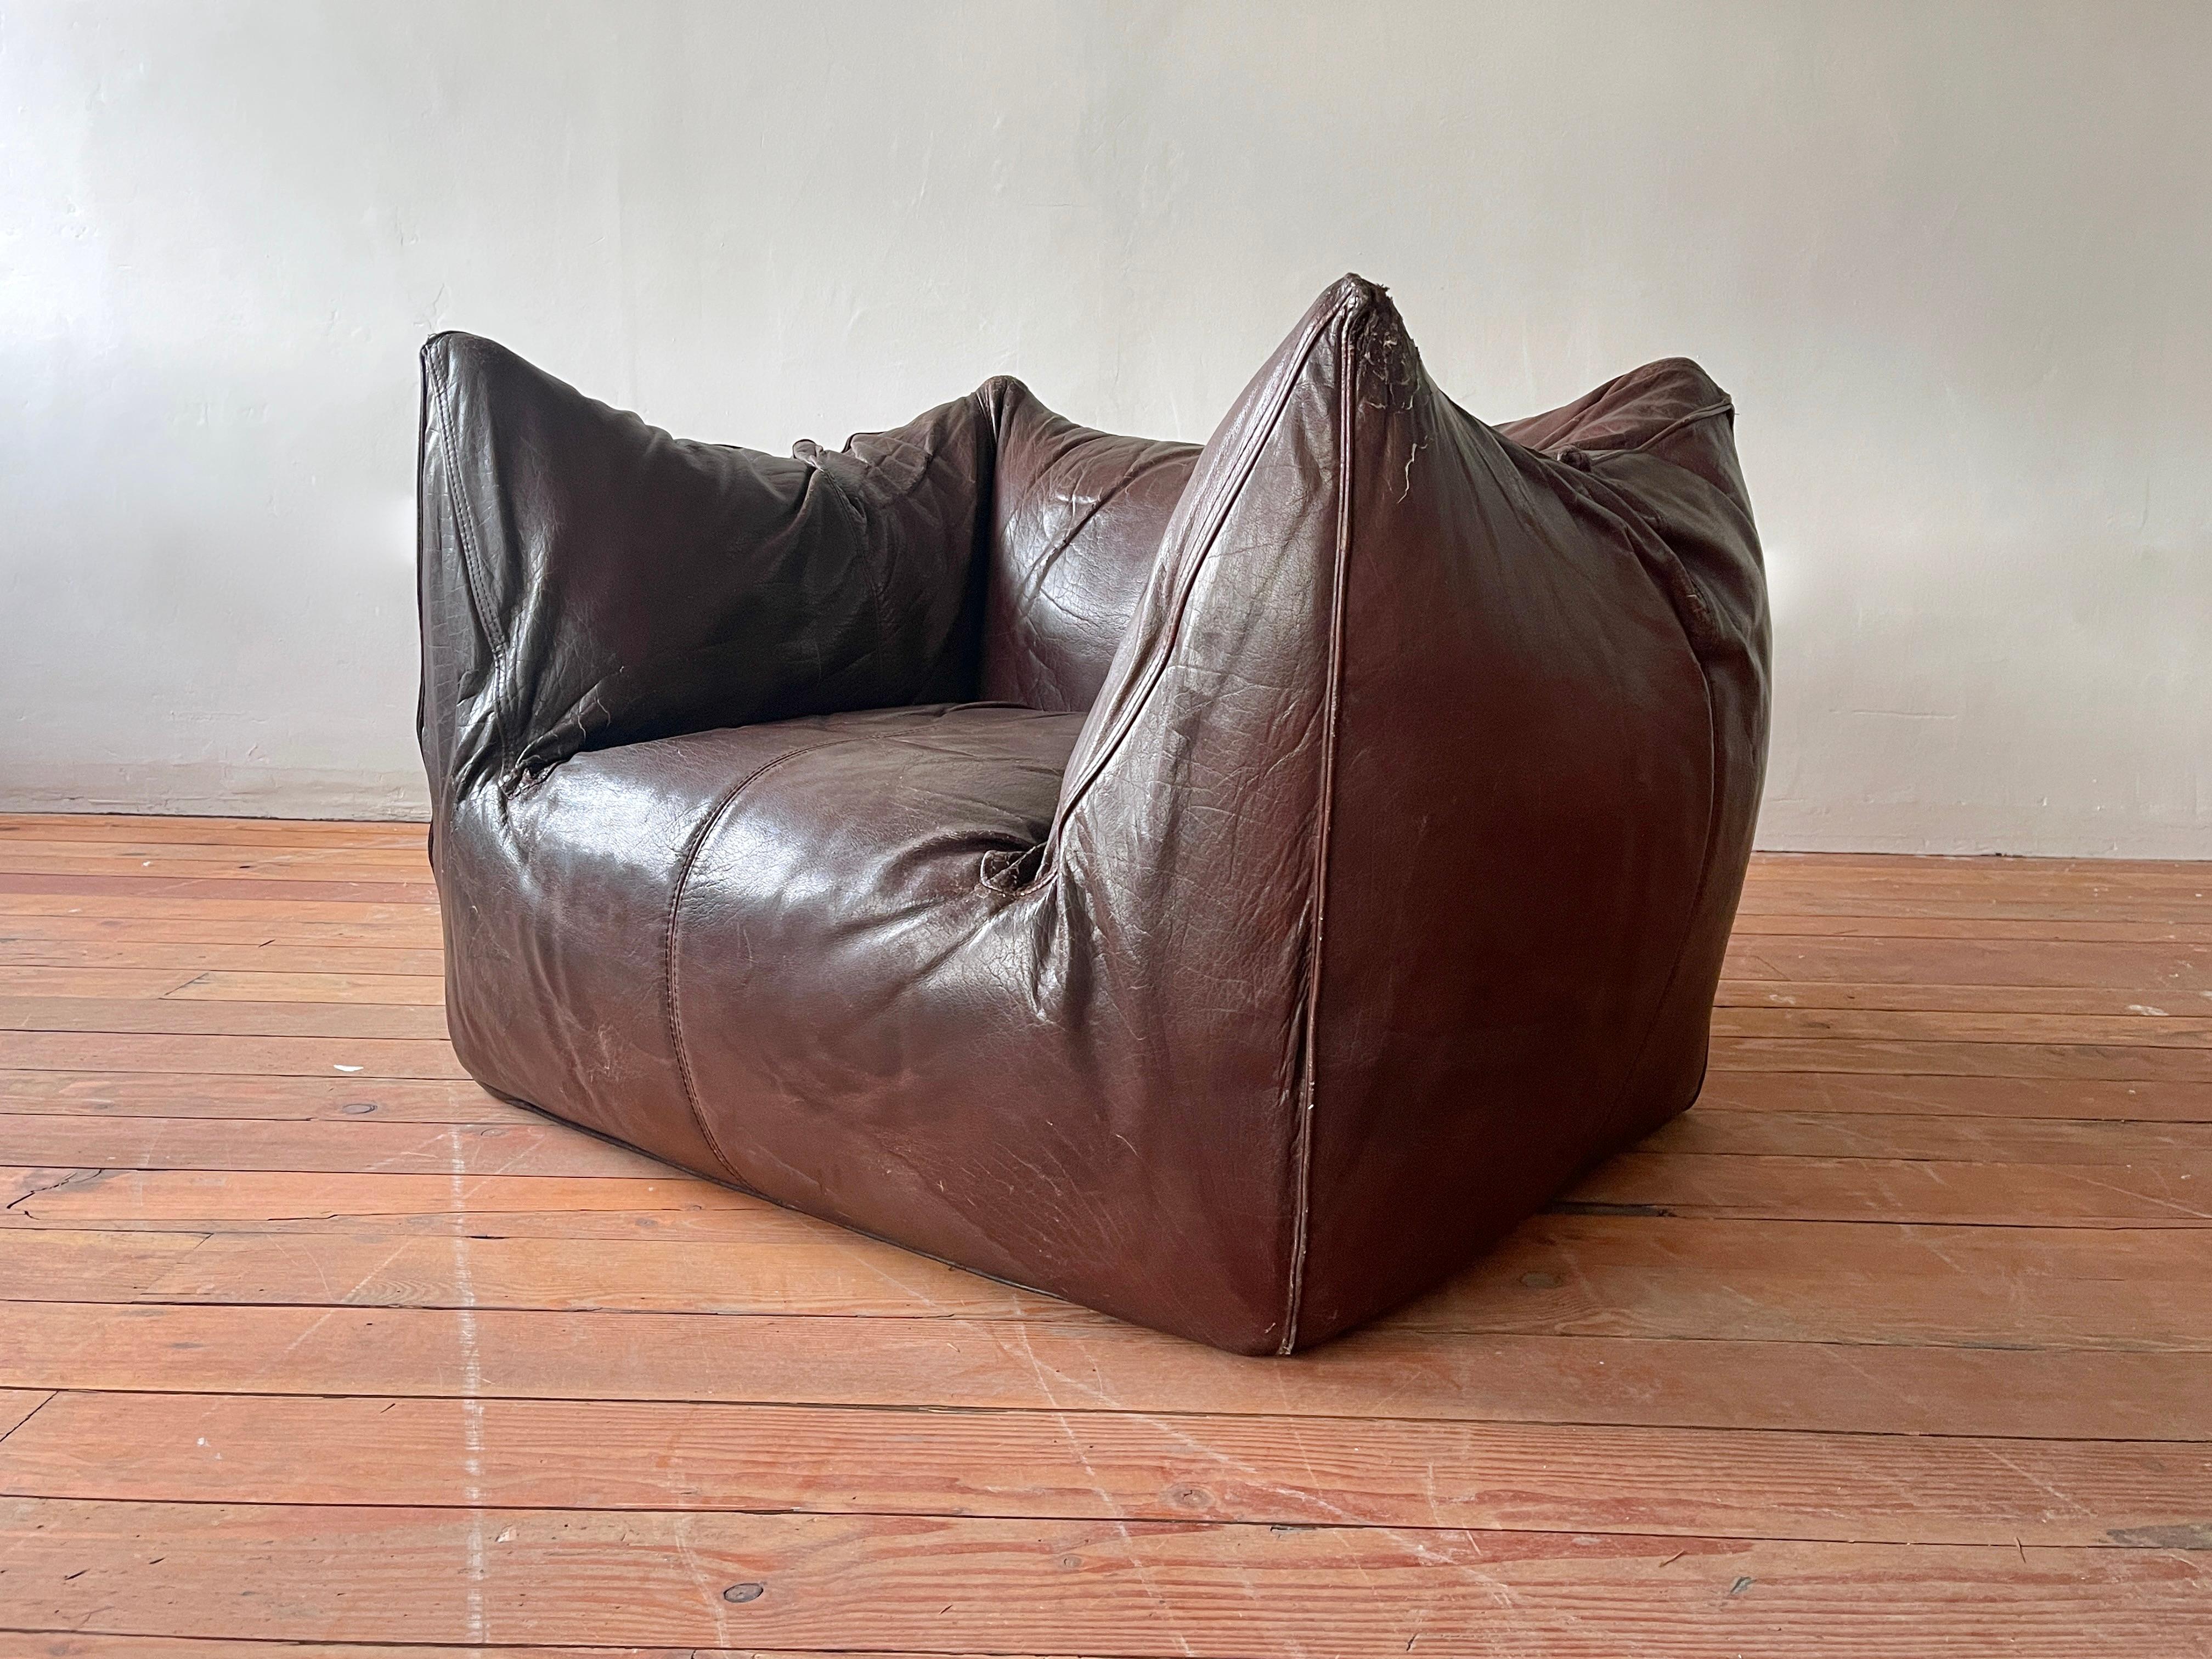 Le Bambole lounge chair by Mario Bellini for B&B Italia 
Italy, 1970's 
Great chocolate brown neck leather with perfectly worm vintage patina
Cracks and imperfections in leather add to the charm.